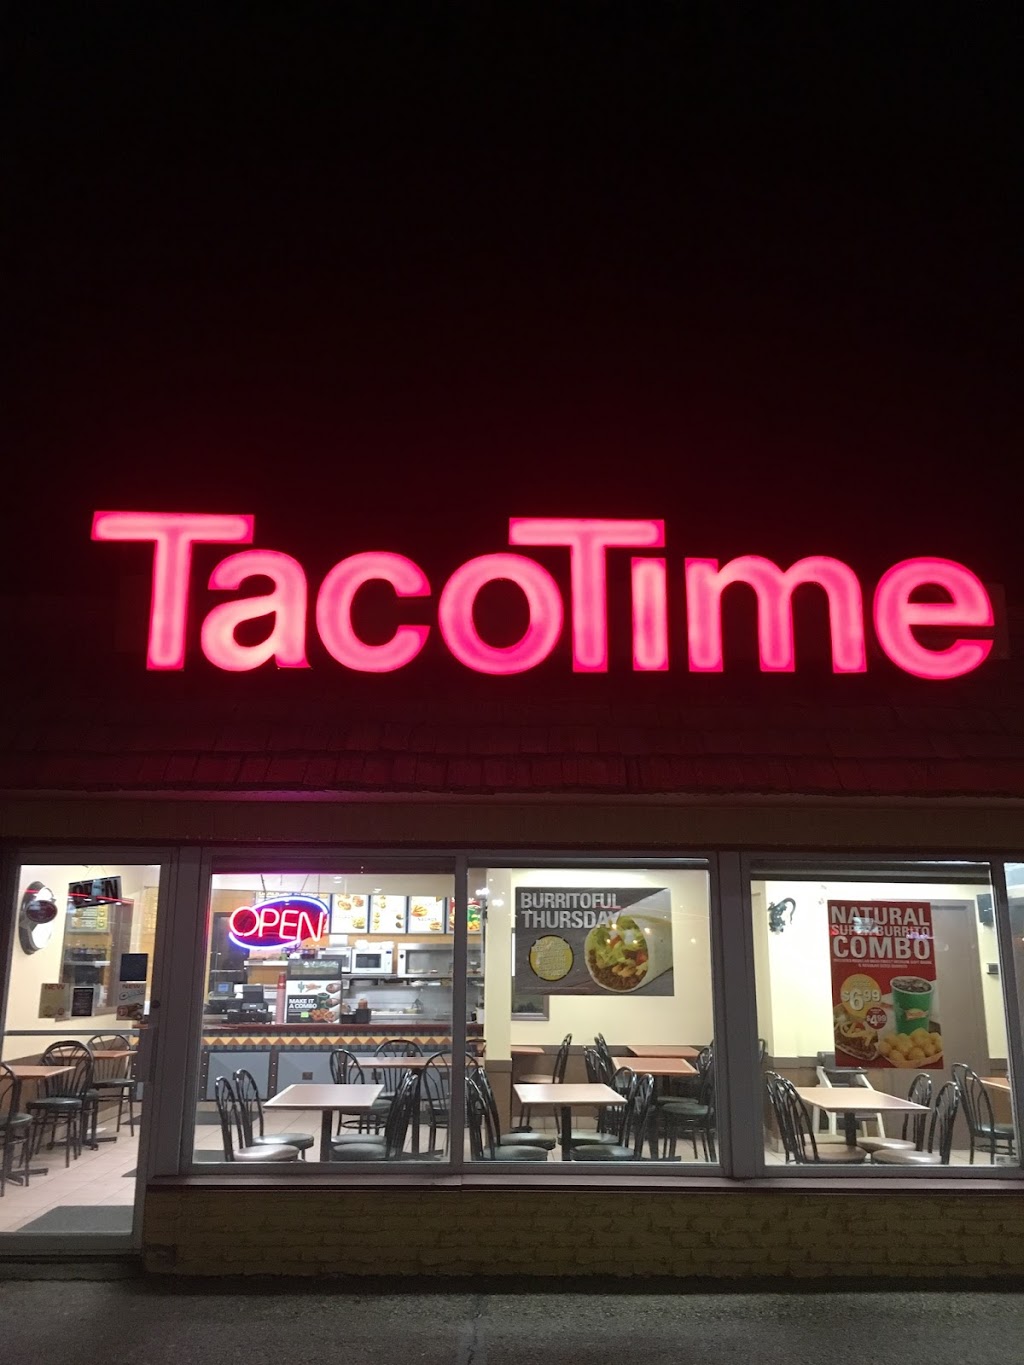 Taco Time | restaurant | 3321 50 Ave, Red Deer, AB T4N 3Y2, Canada | 4033472205 OR +1 403-347-2205